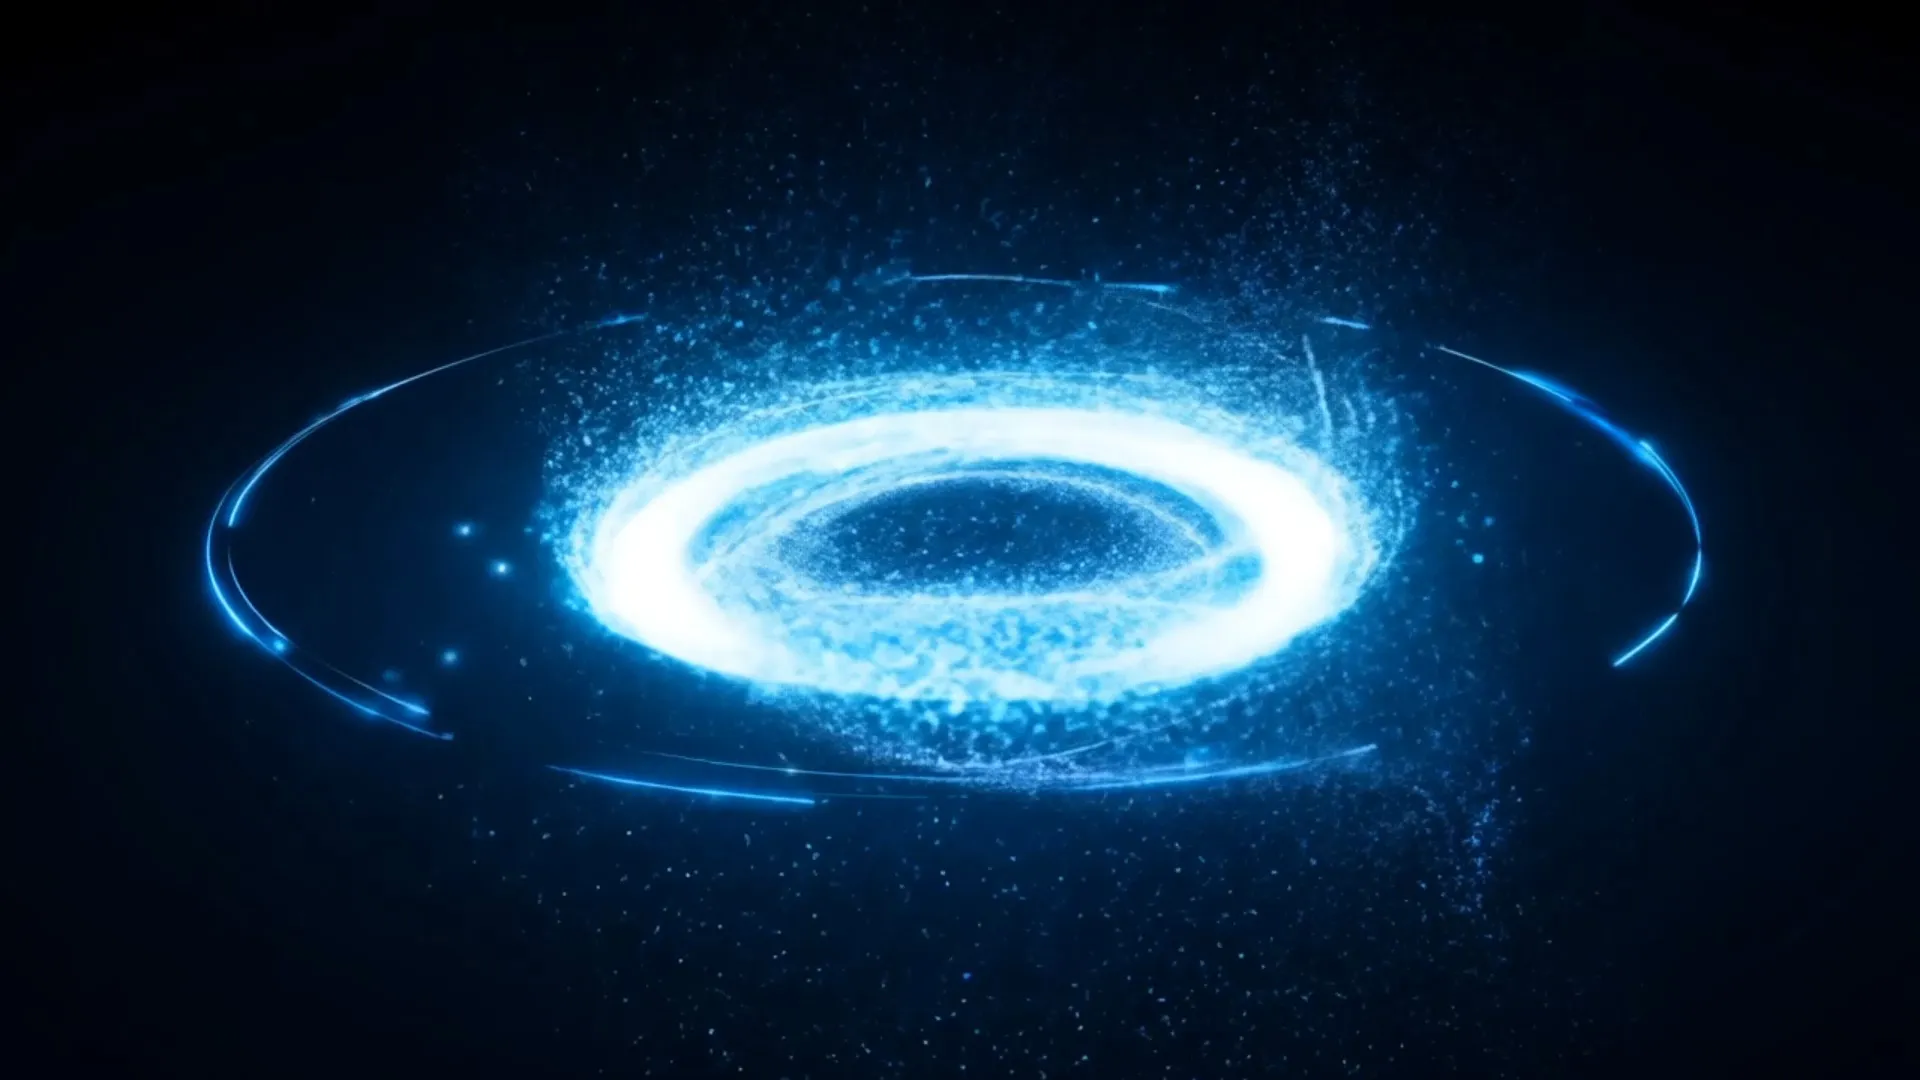 Techno Ring Digital Loop for Sci-Fi Titles Animation